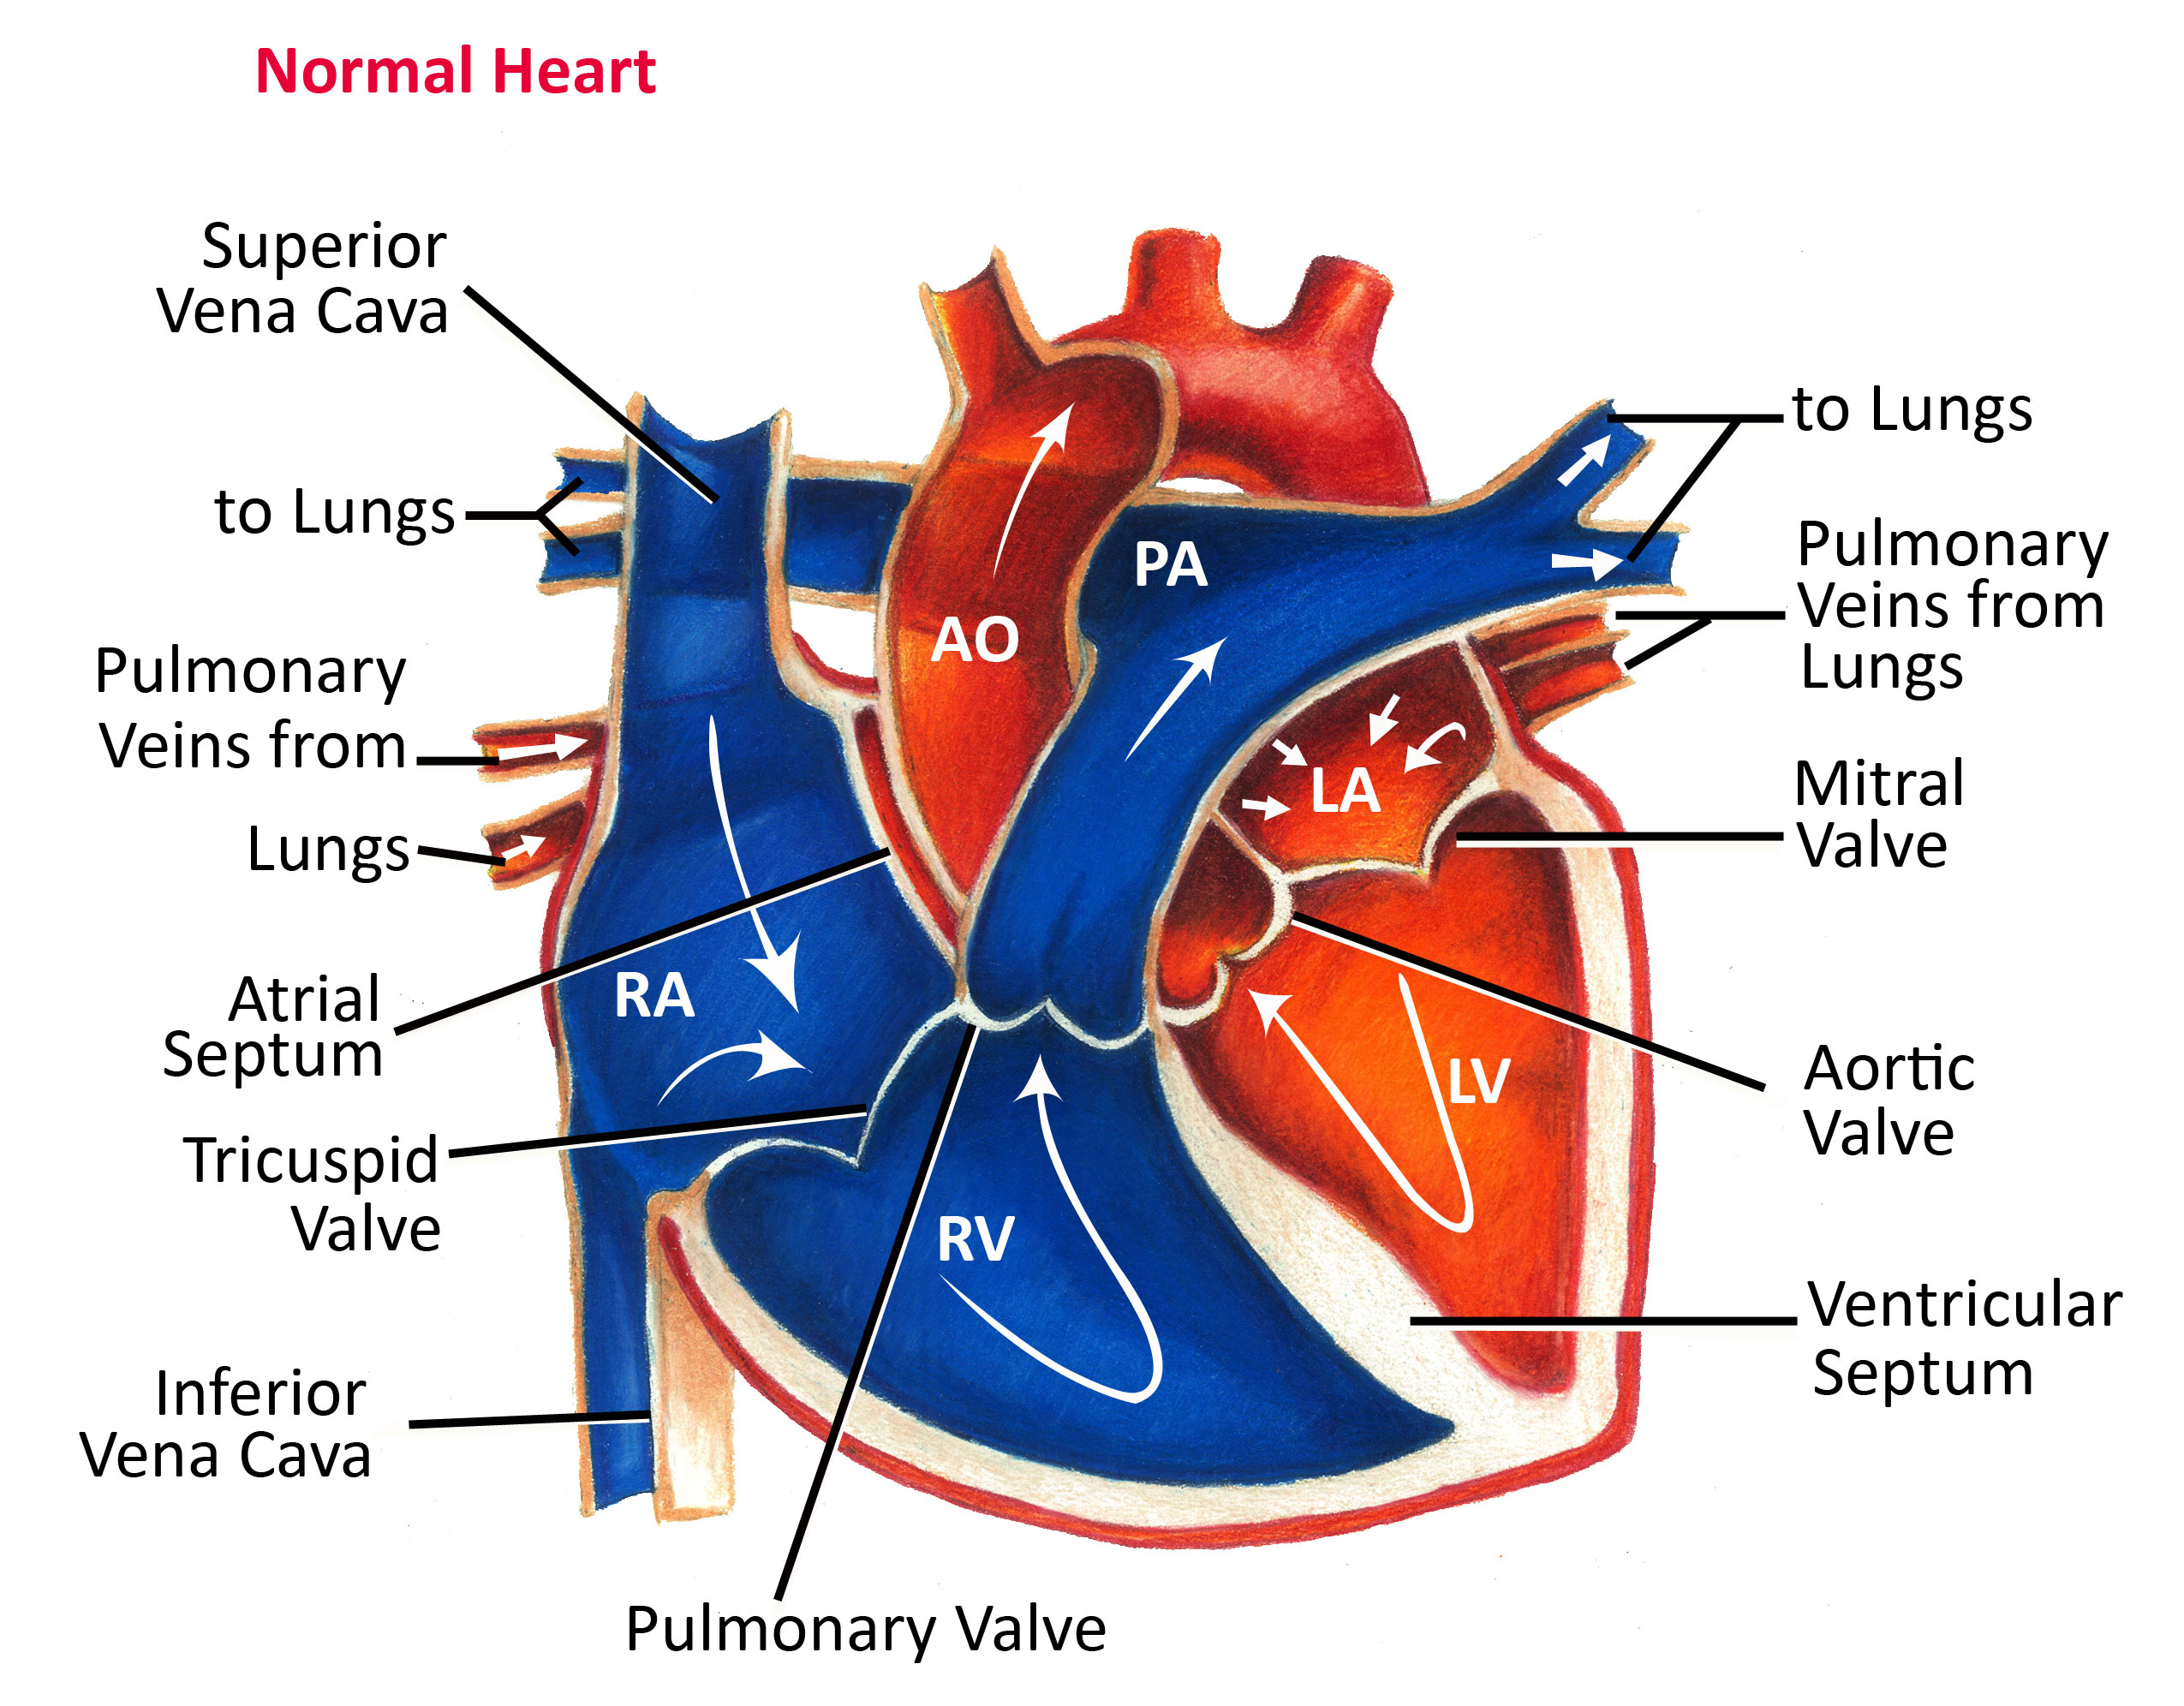 Normal Heart Anatomy and Blood Flow